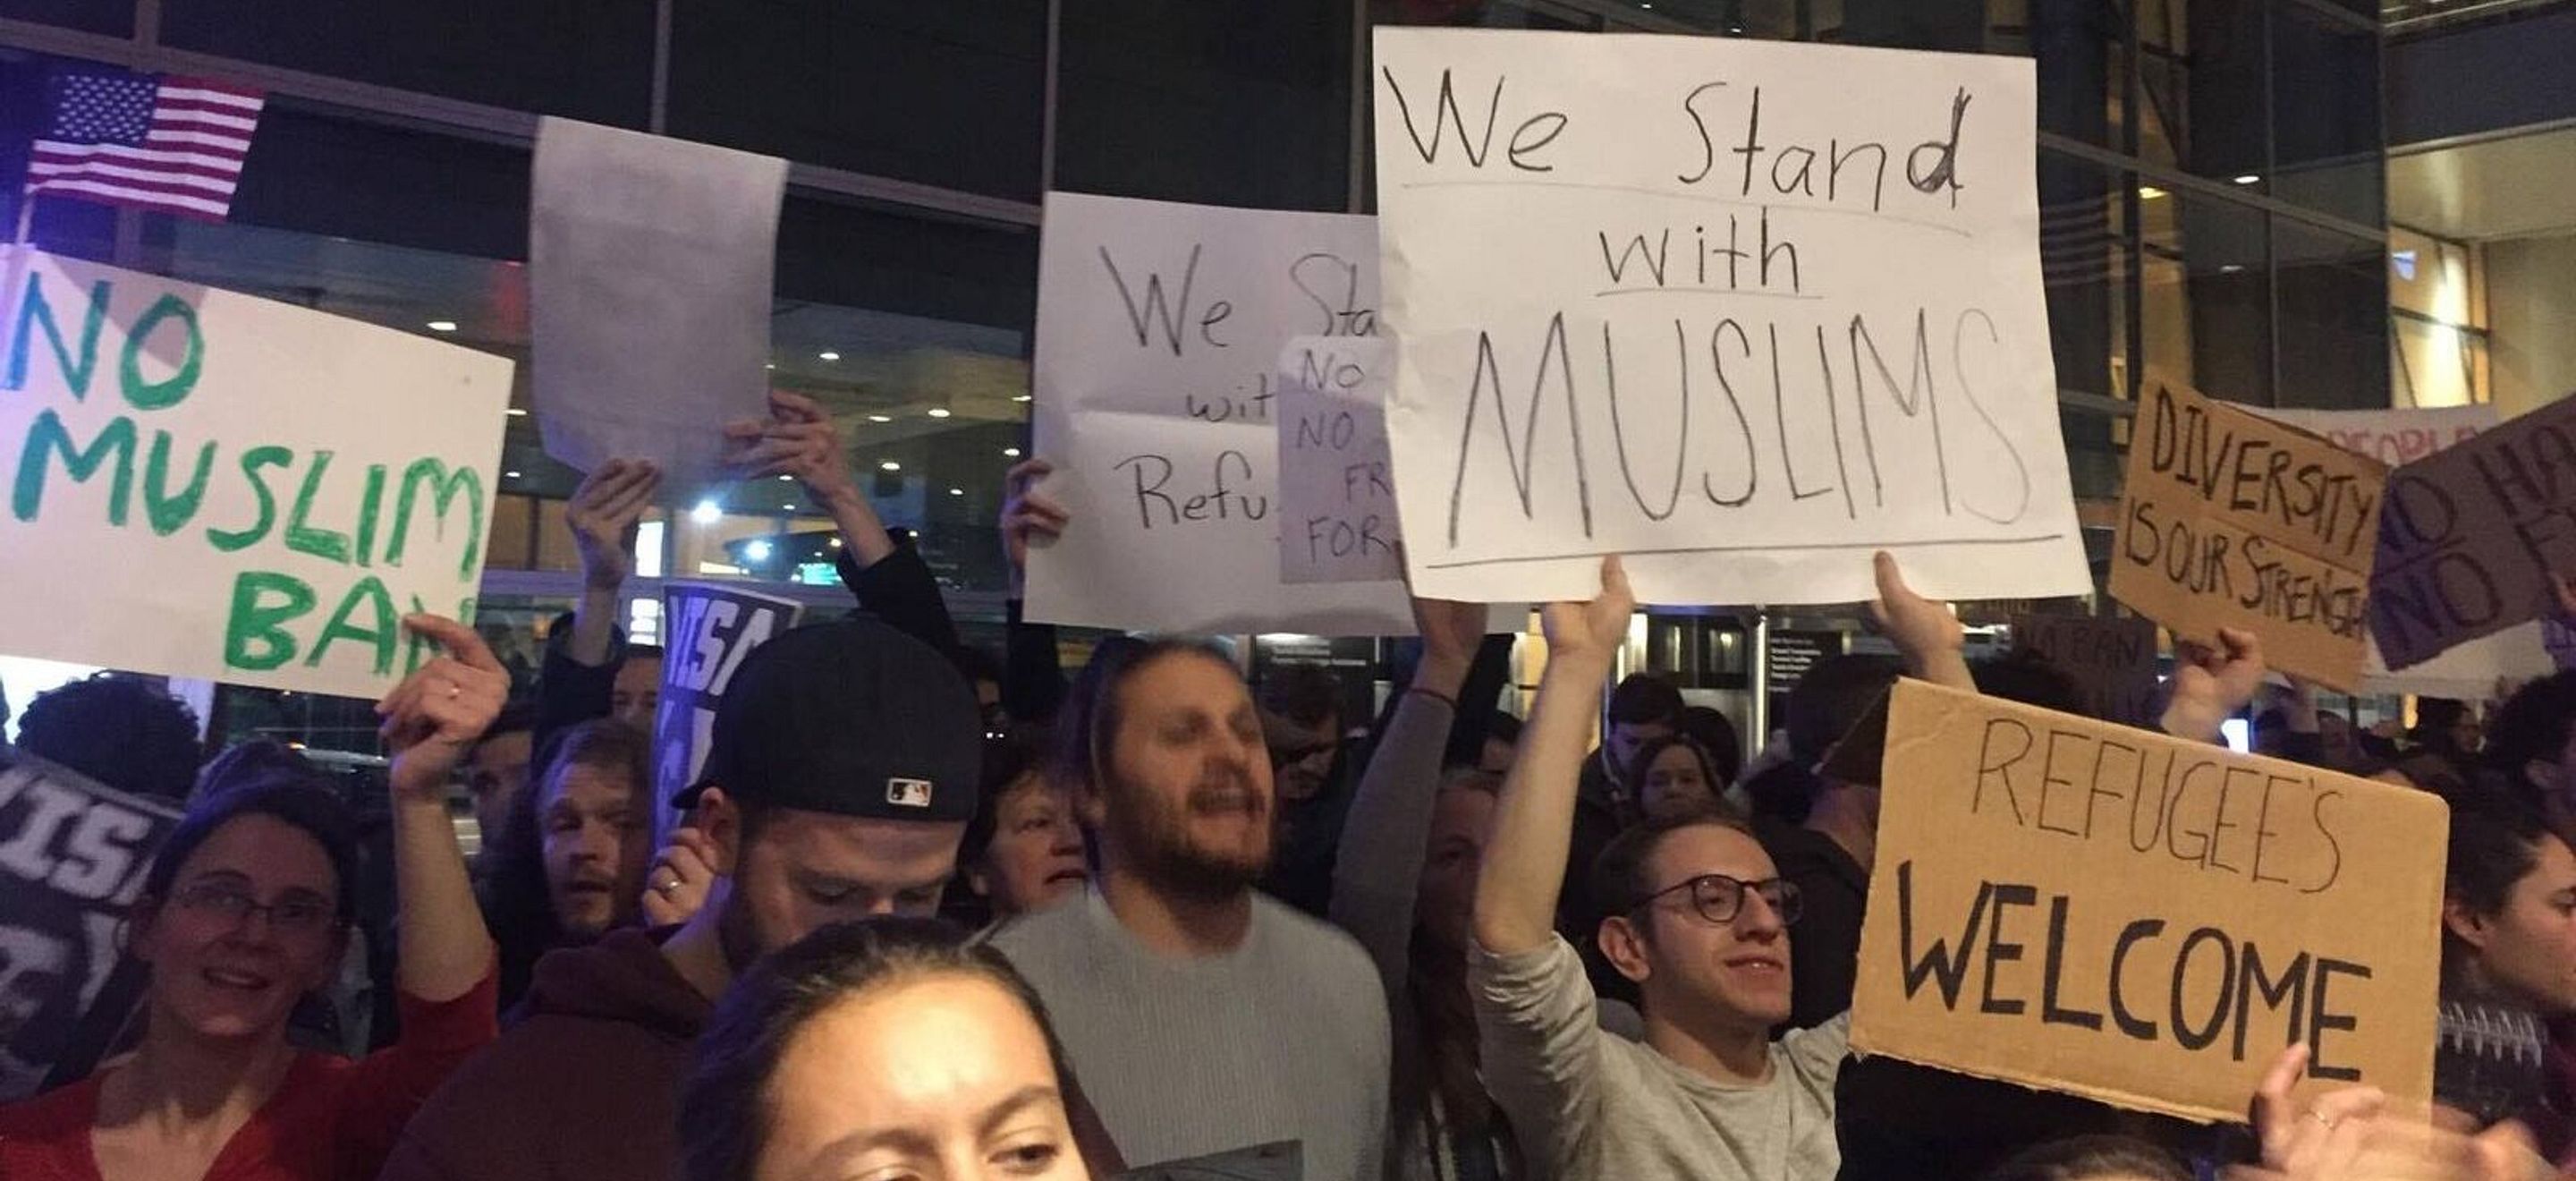 Protesters rally against the Muslim ban at Logan airport